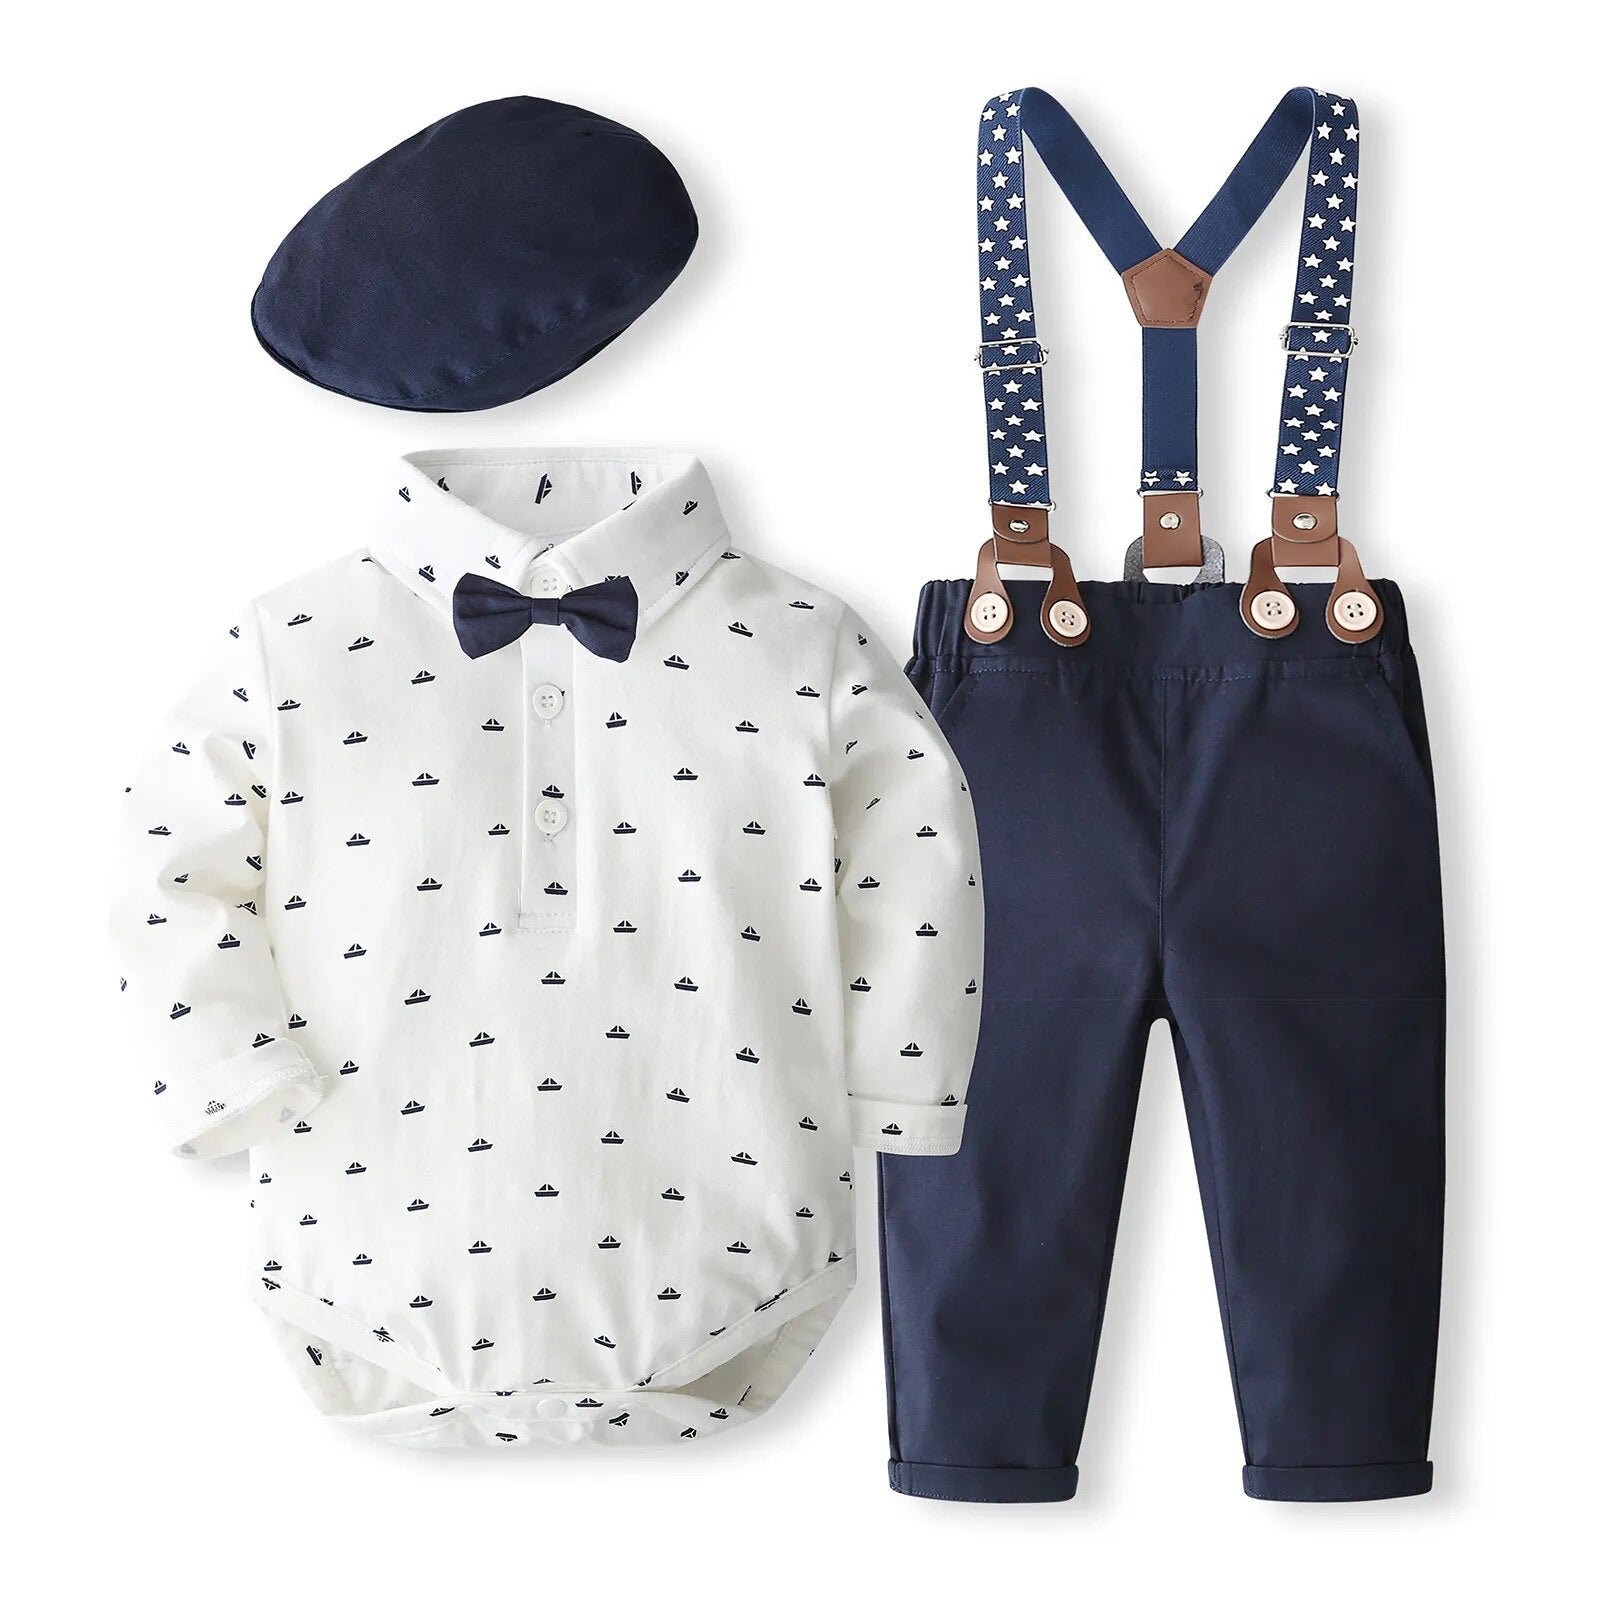 ZHAGHMIN Winter Clothes For 24 Months Boys Boys Long Sleeve Color Matching  Pullover Sweatshirt Tops Pants Outfits 3 Month Baby Boy Toddler Dress Shirt  And Pants Shirt With Bow Tie Baby Boy